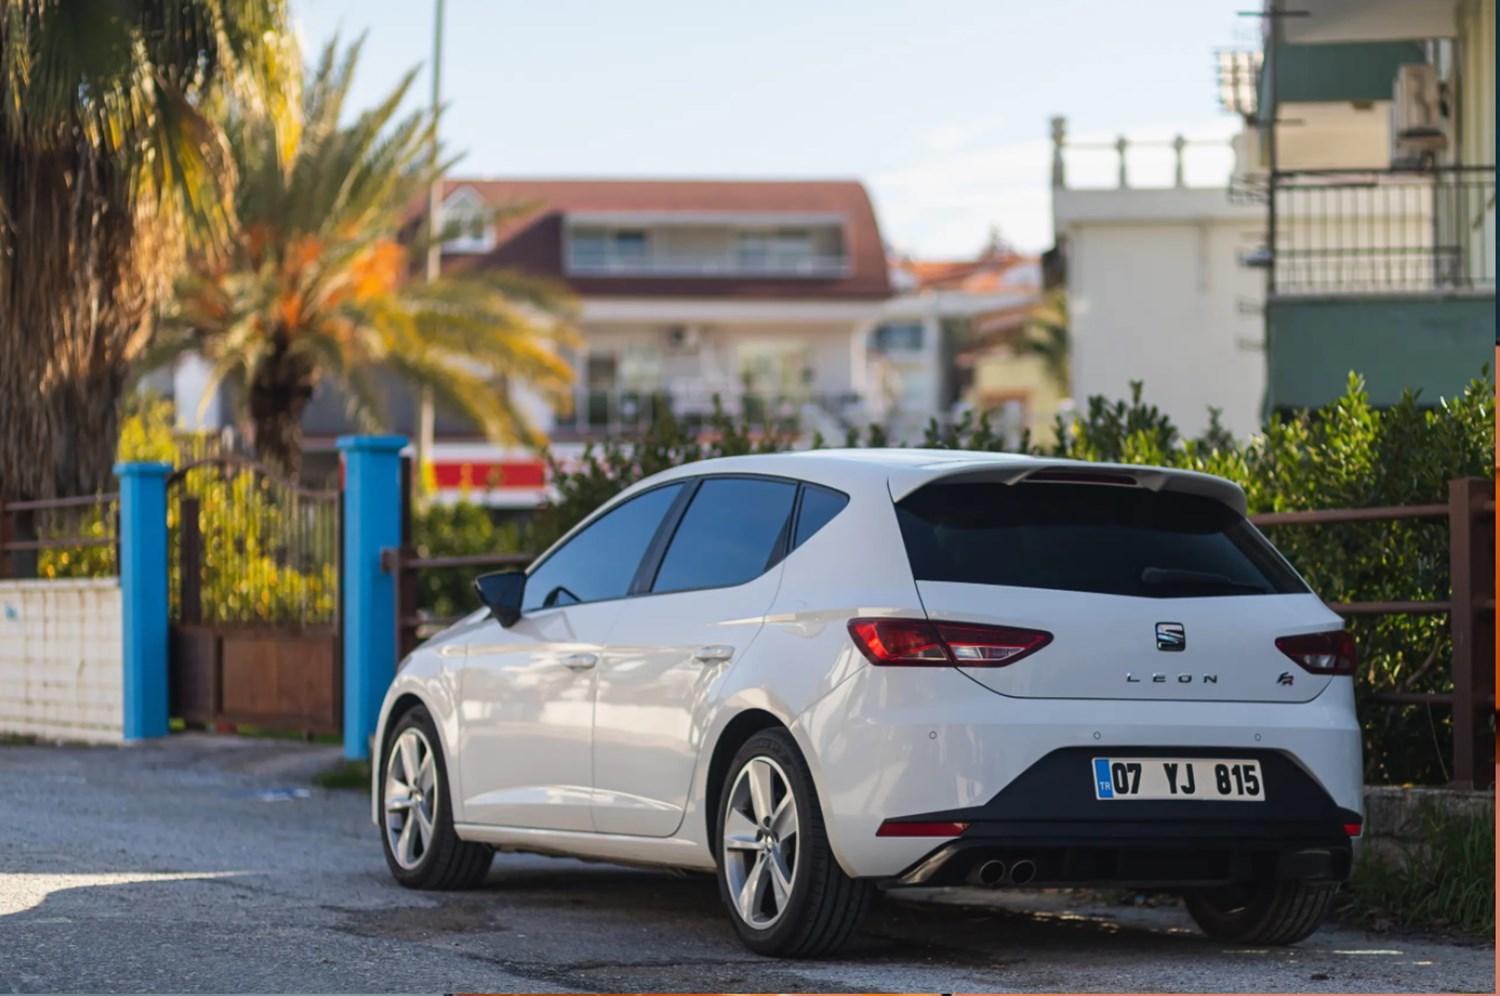 Seat Leon: 5 reasons why it's our 2022 Best Family Car